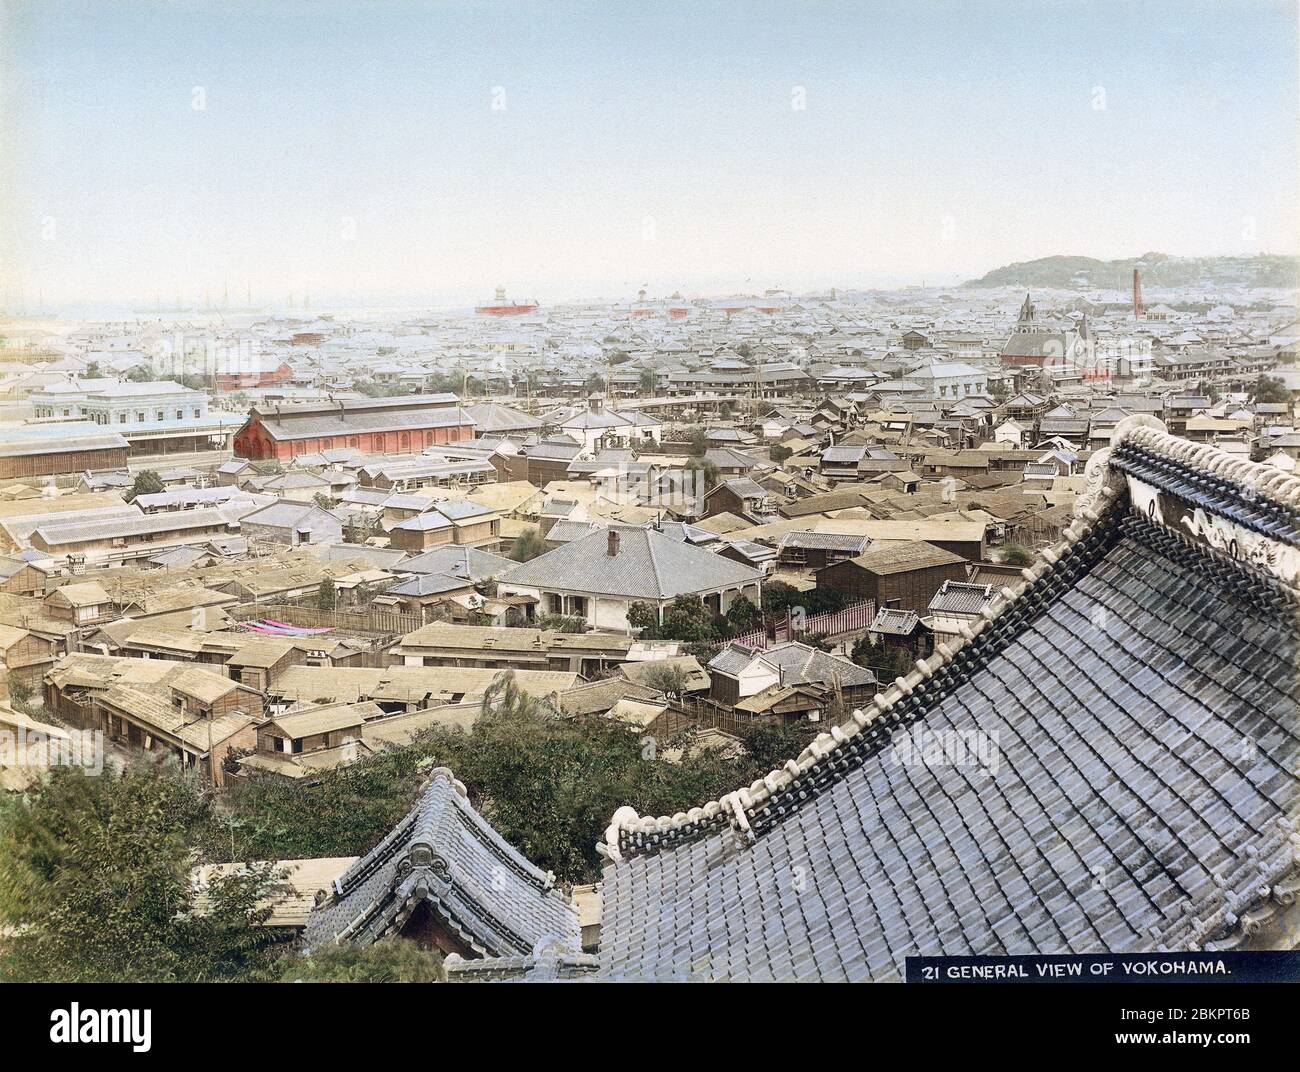 [ 1890s Japan - View of Yokohama ] —   Panoramic view of Yokohama sometime in the 1890s as seen from Narita-san Enmei-in Temple.  The twin buildings on the left are Yokohama Station, opened in 1871 (Meiji 4). The tower in right behind the roof of the temple is the Yokohama Shiloh Church (横浜指路教会), built in 1892 (Meiji 25).  Compare this photo with 70507-0033 – View of Yokohama, shot from the same location around 1881 (Meiji 14).  19th century vintage albumen photograph. Stock Photo